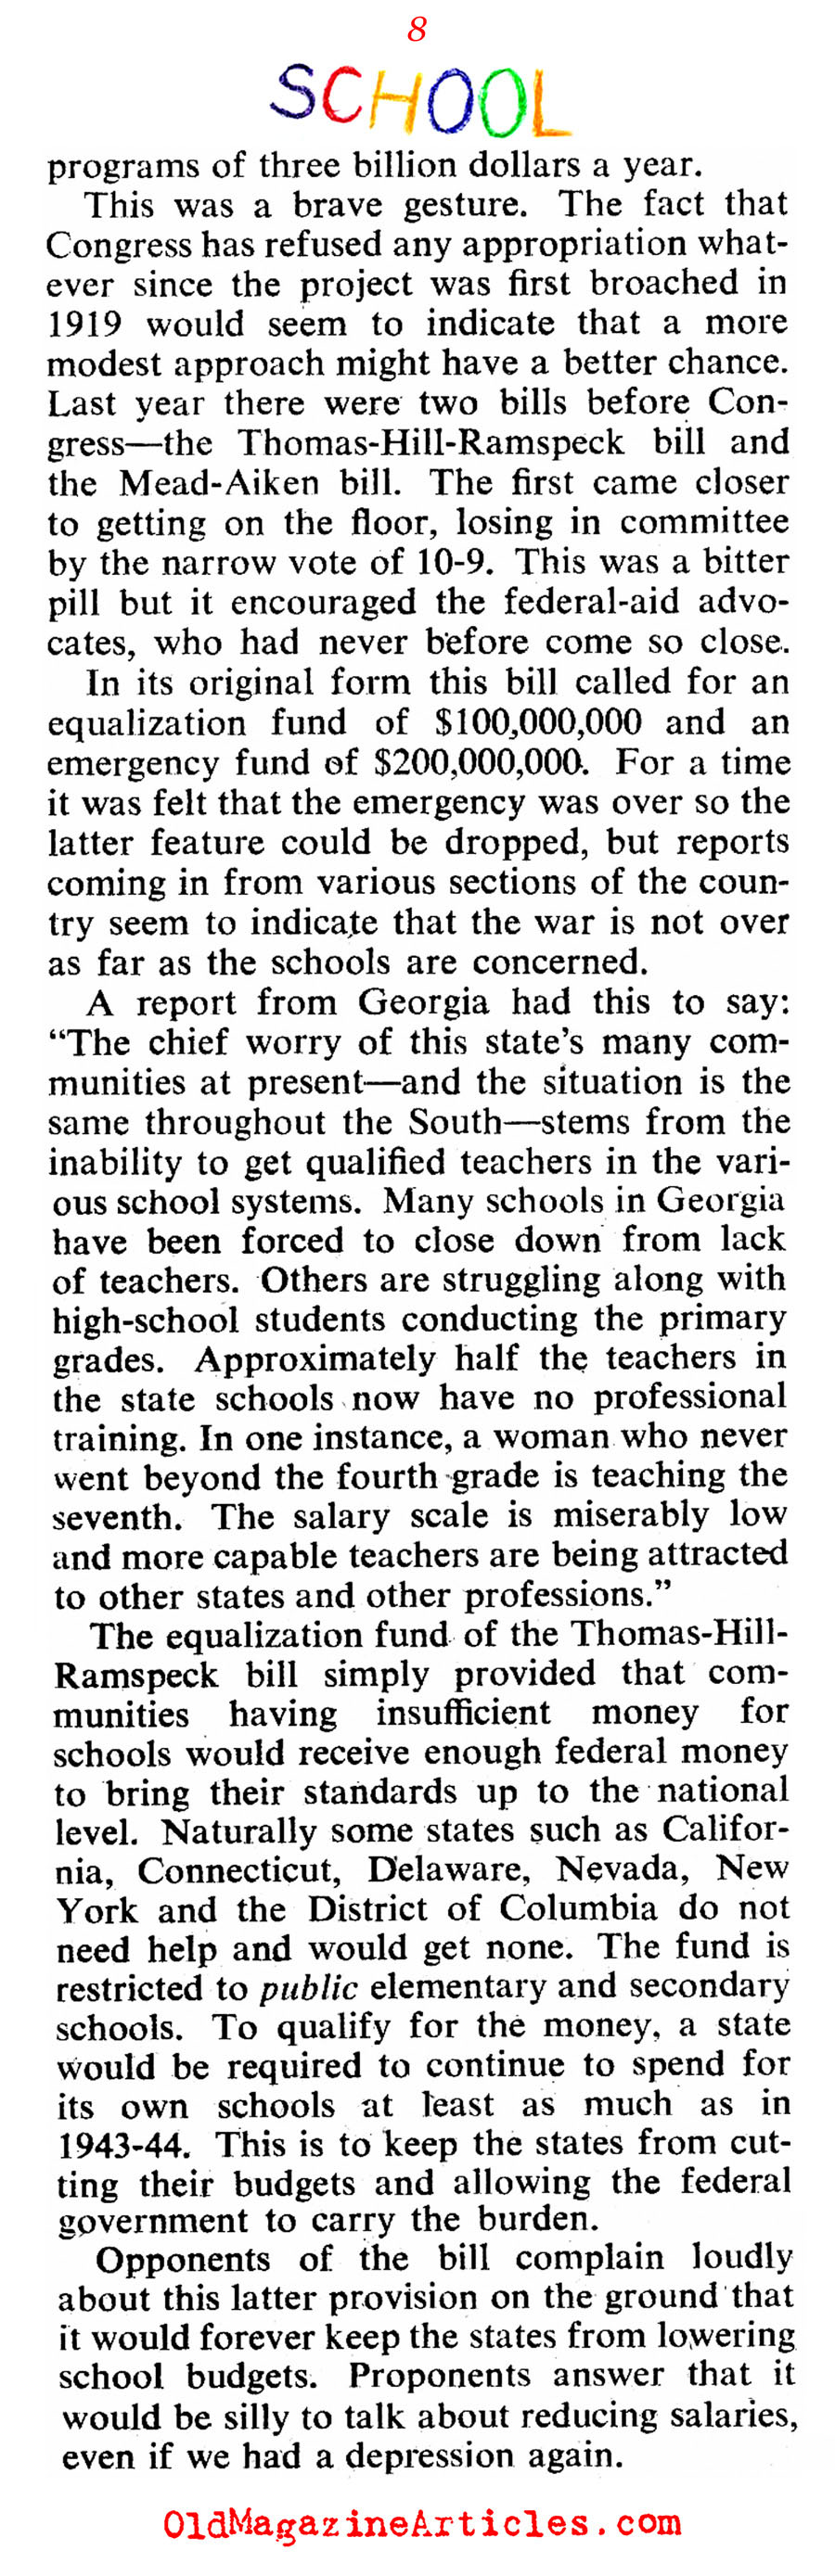 ''Our Schools Are A Scandal'' (Collier's Magazine, 1946)